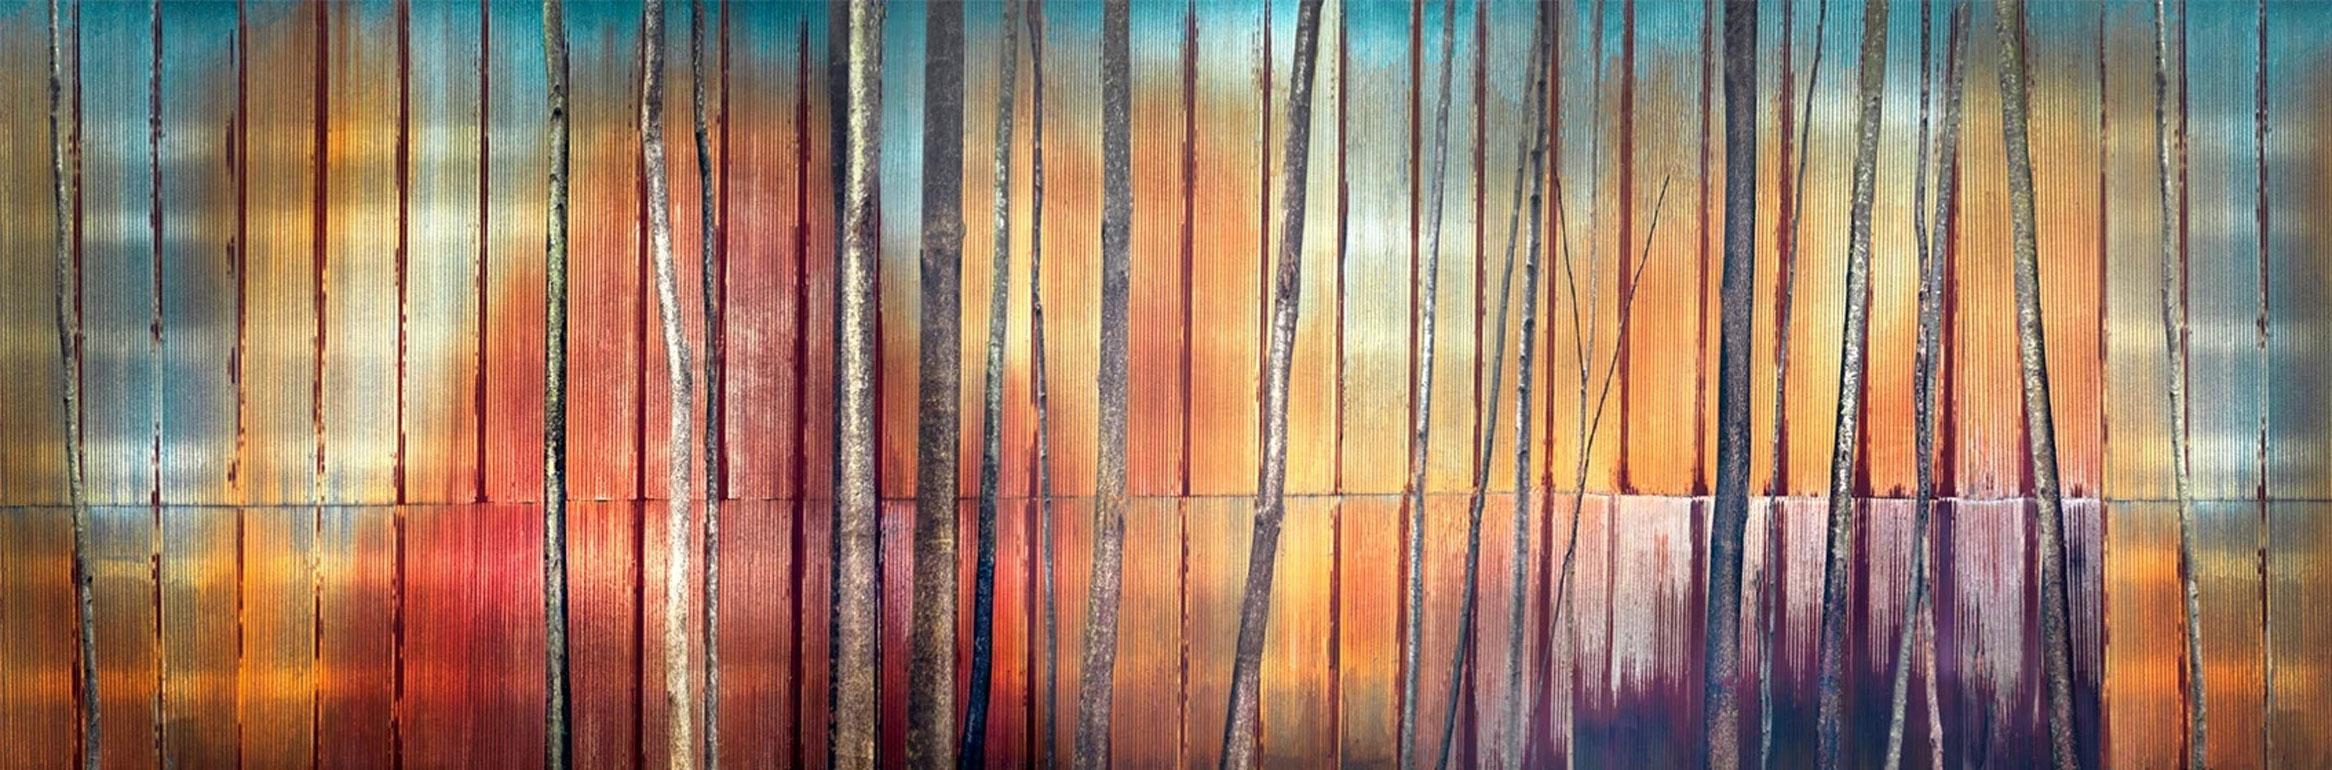 Strips of colour from a rusting building in the Hudson Valley, New York.
–
Cawston’s search for these lost spaces of distressed beauty have taken him from Bristol to Burma, Mexico to Manaus. Often with rich colours and a cinematic feel, these lost